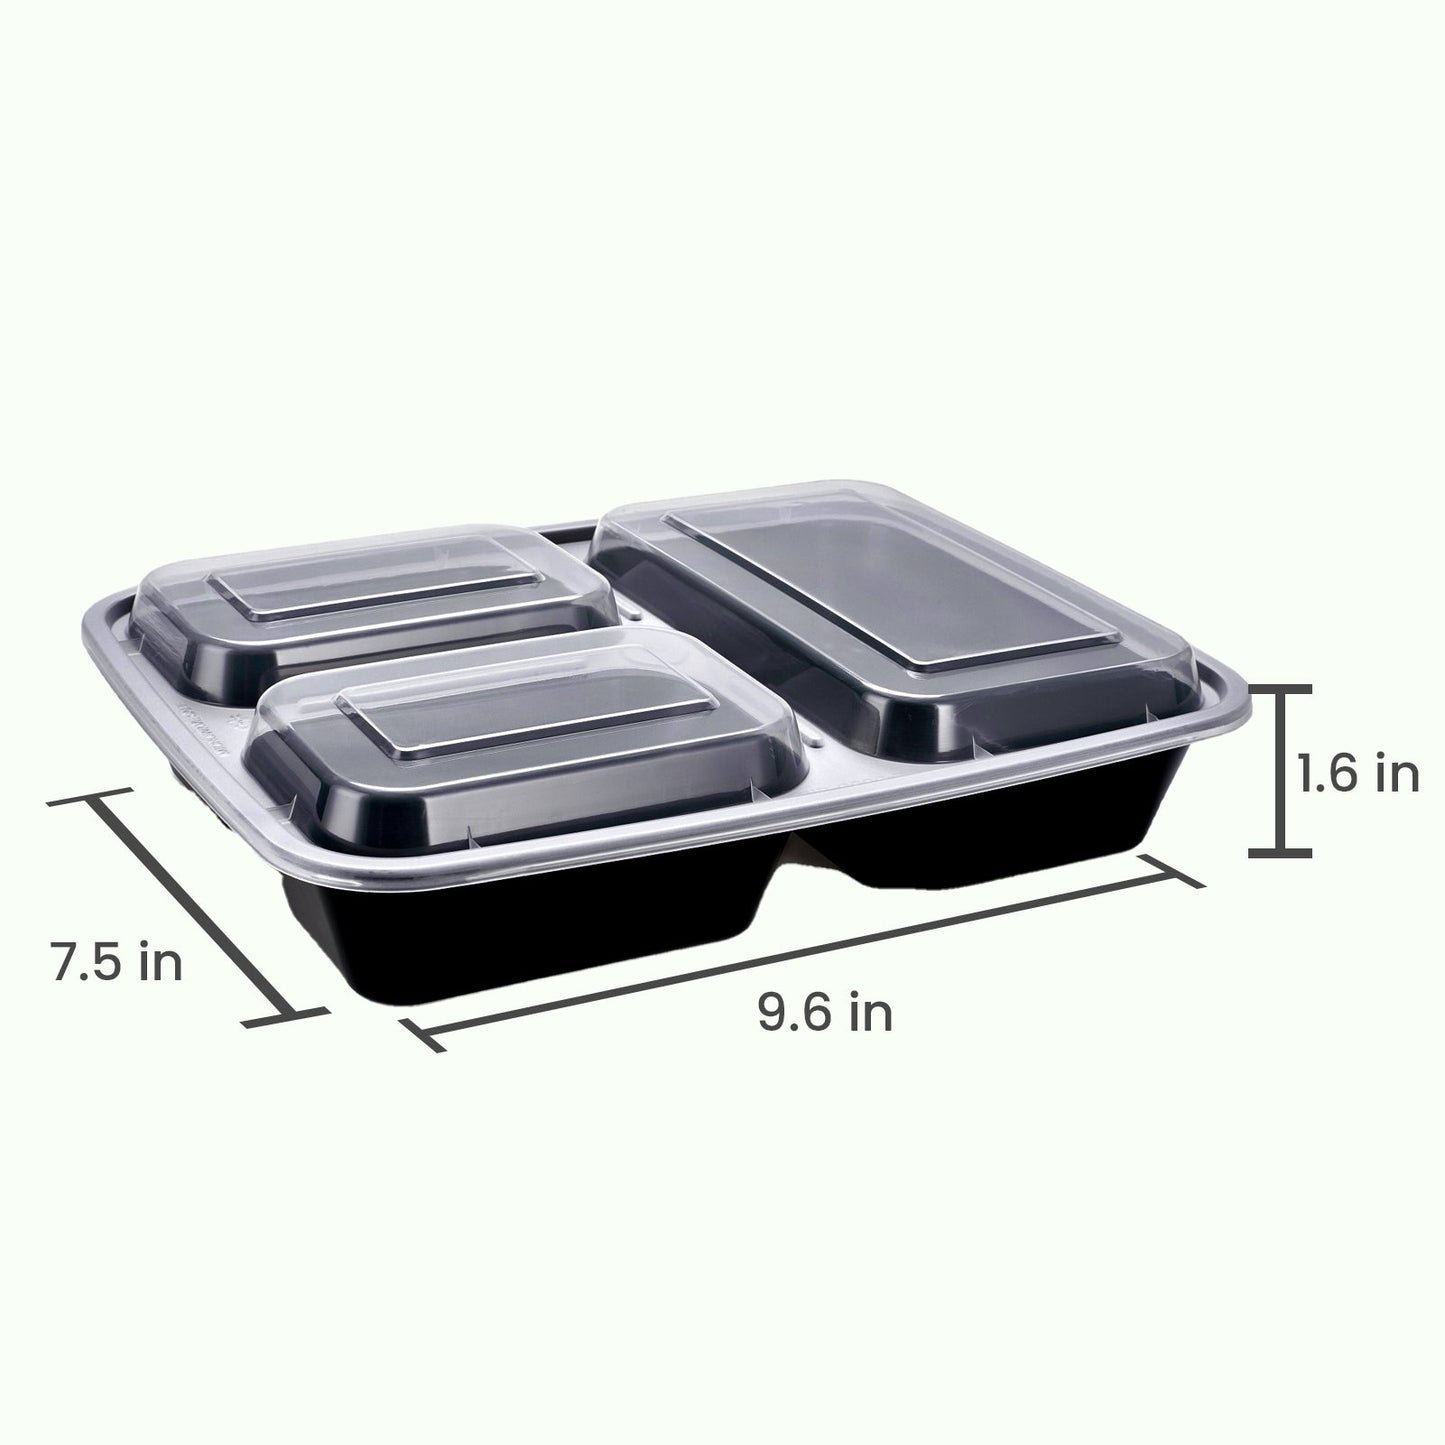 Meal Prep Containers Bento Box 20-pc. 3-Compartment Container Set*3